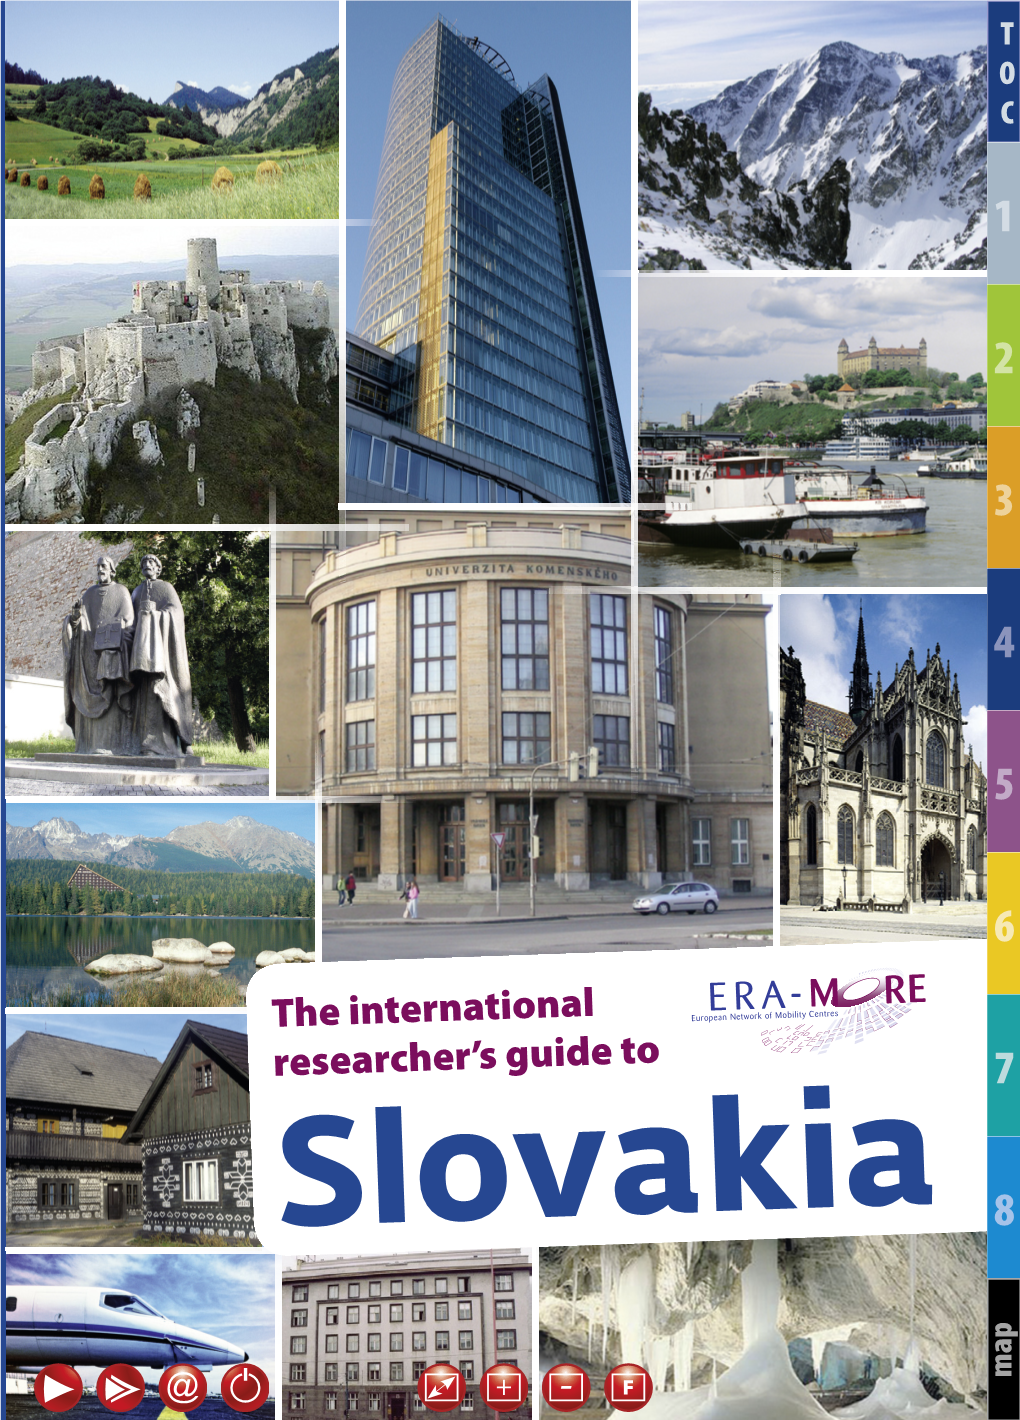 The International Researcher's Guide to Slovakia